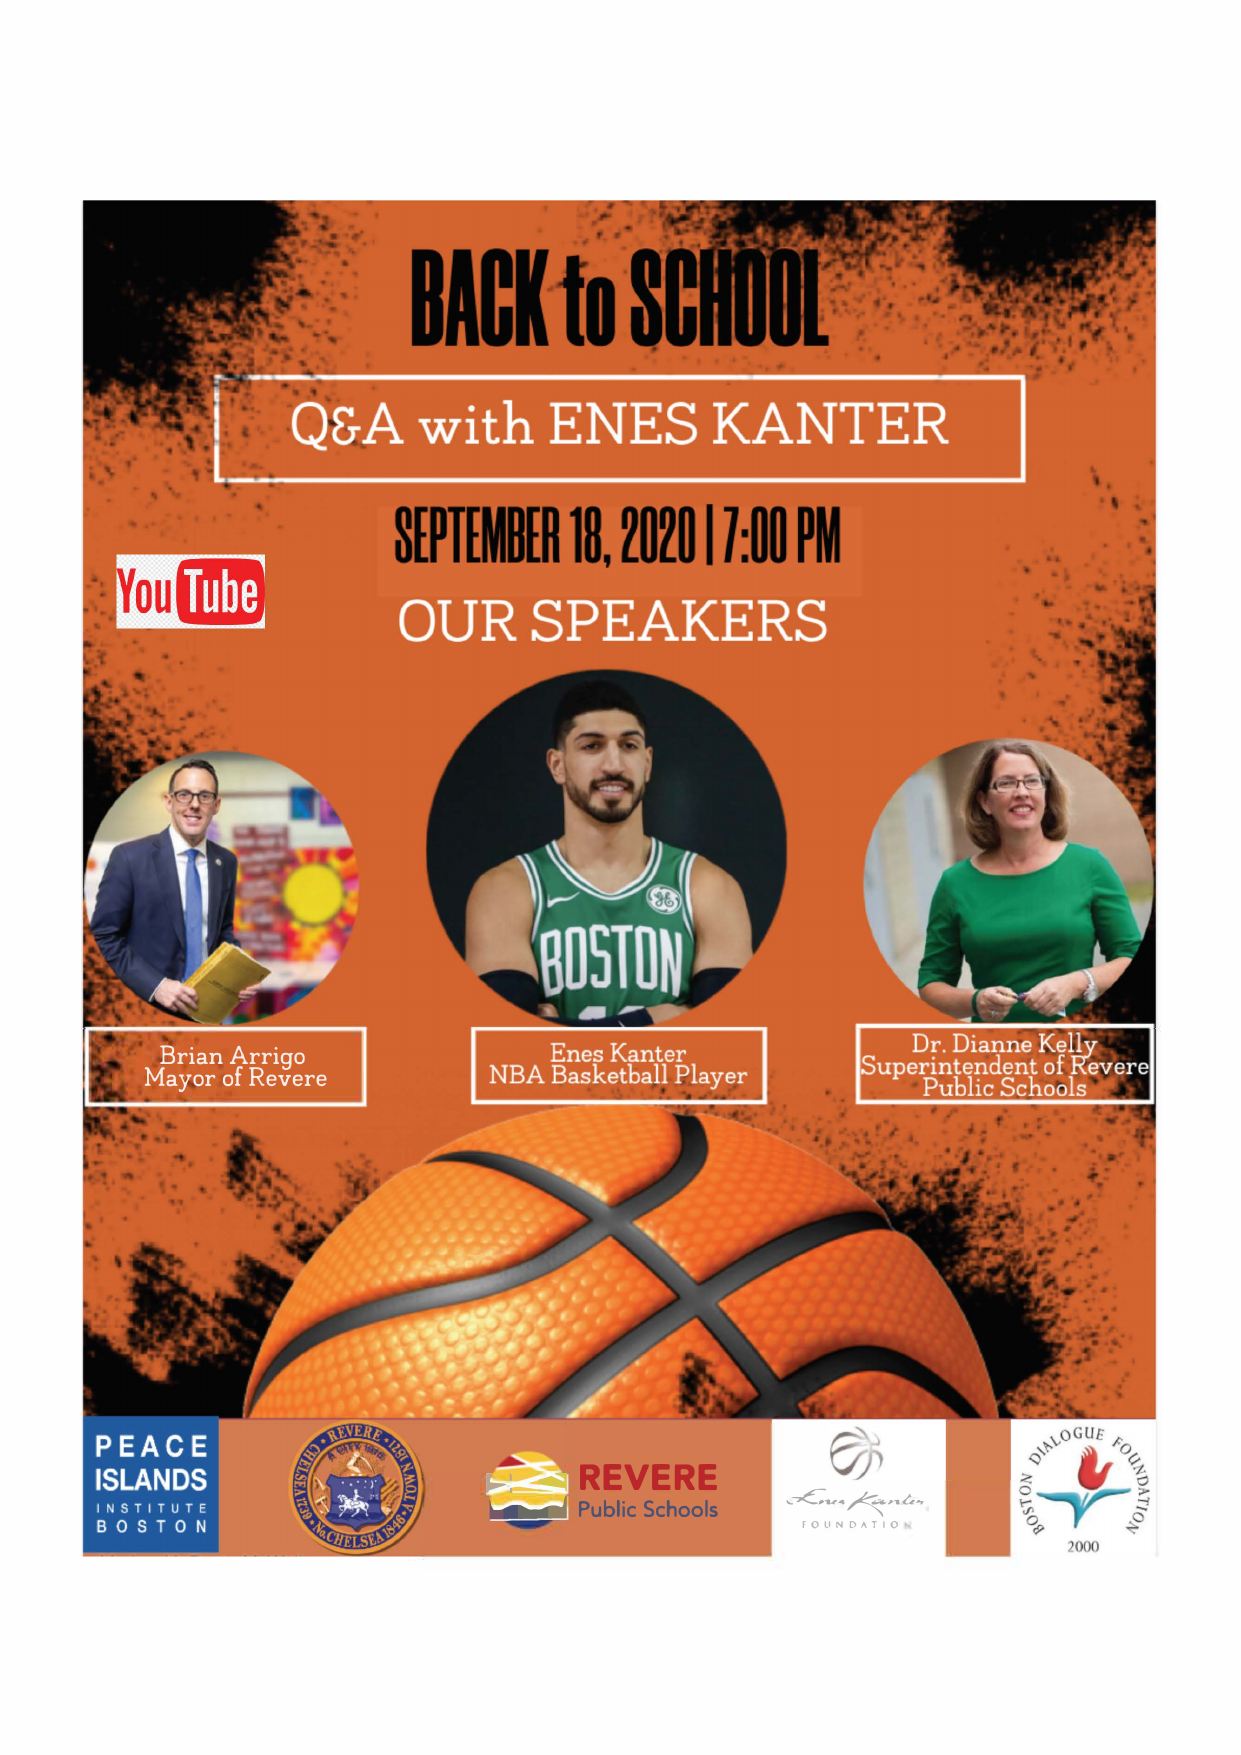 Q & E with Enes Kanter